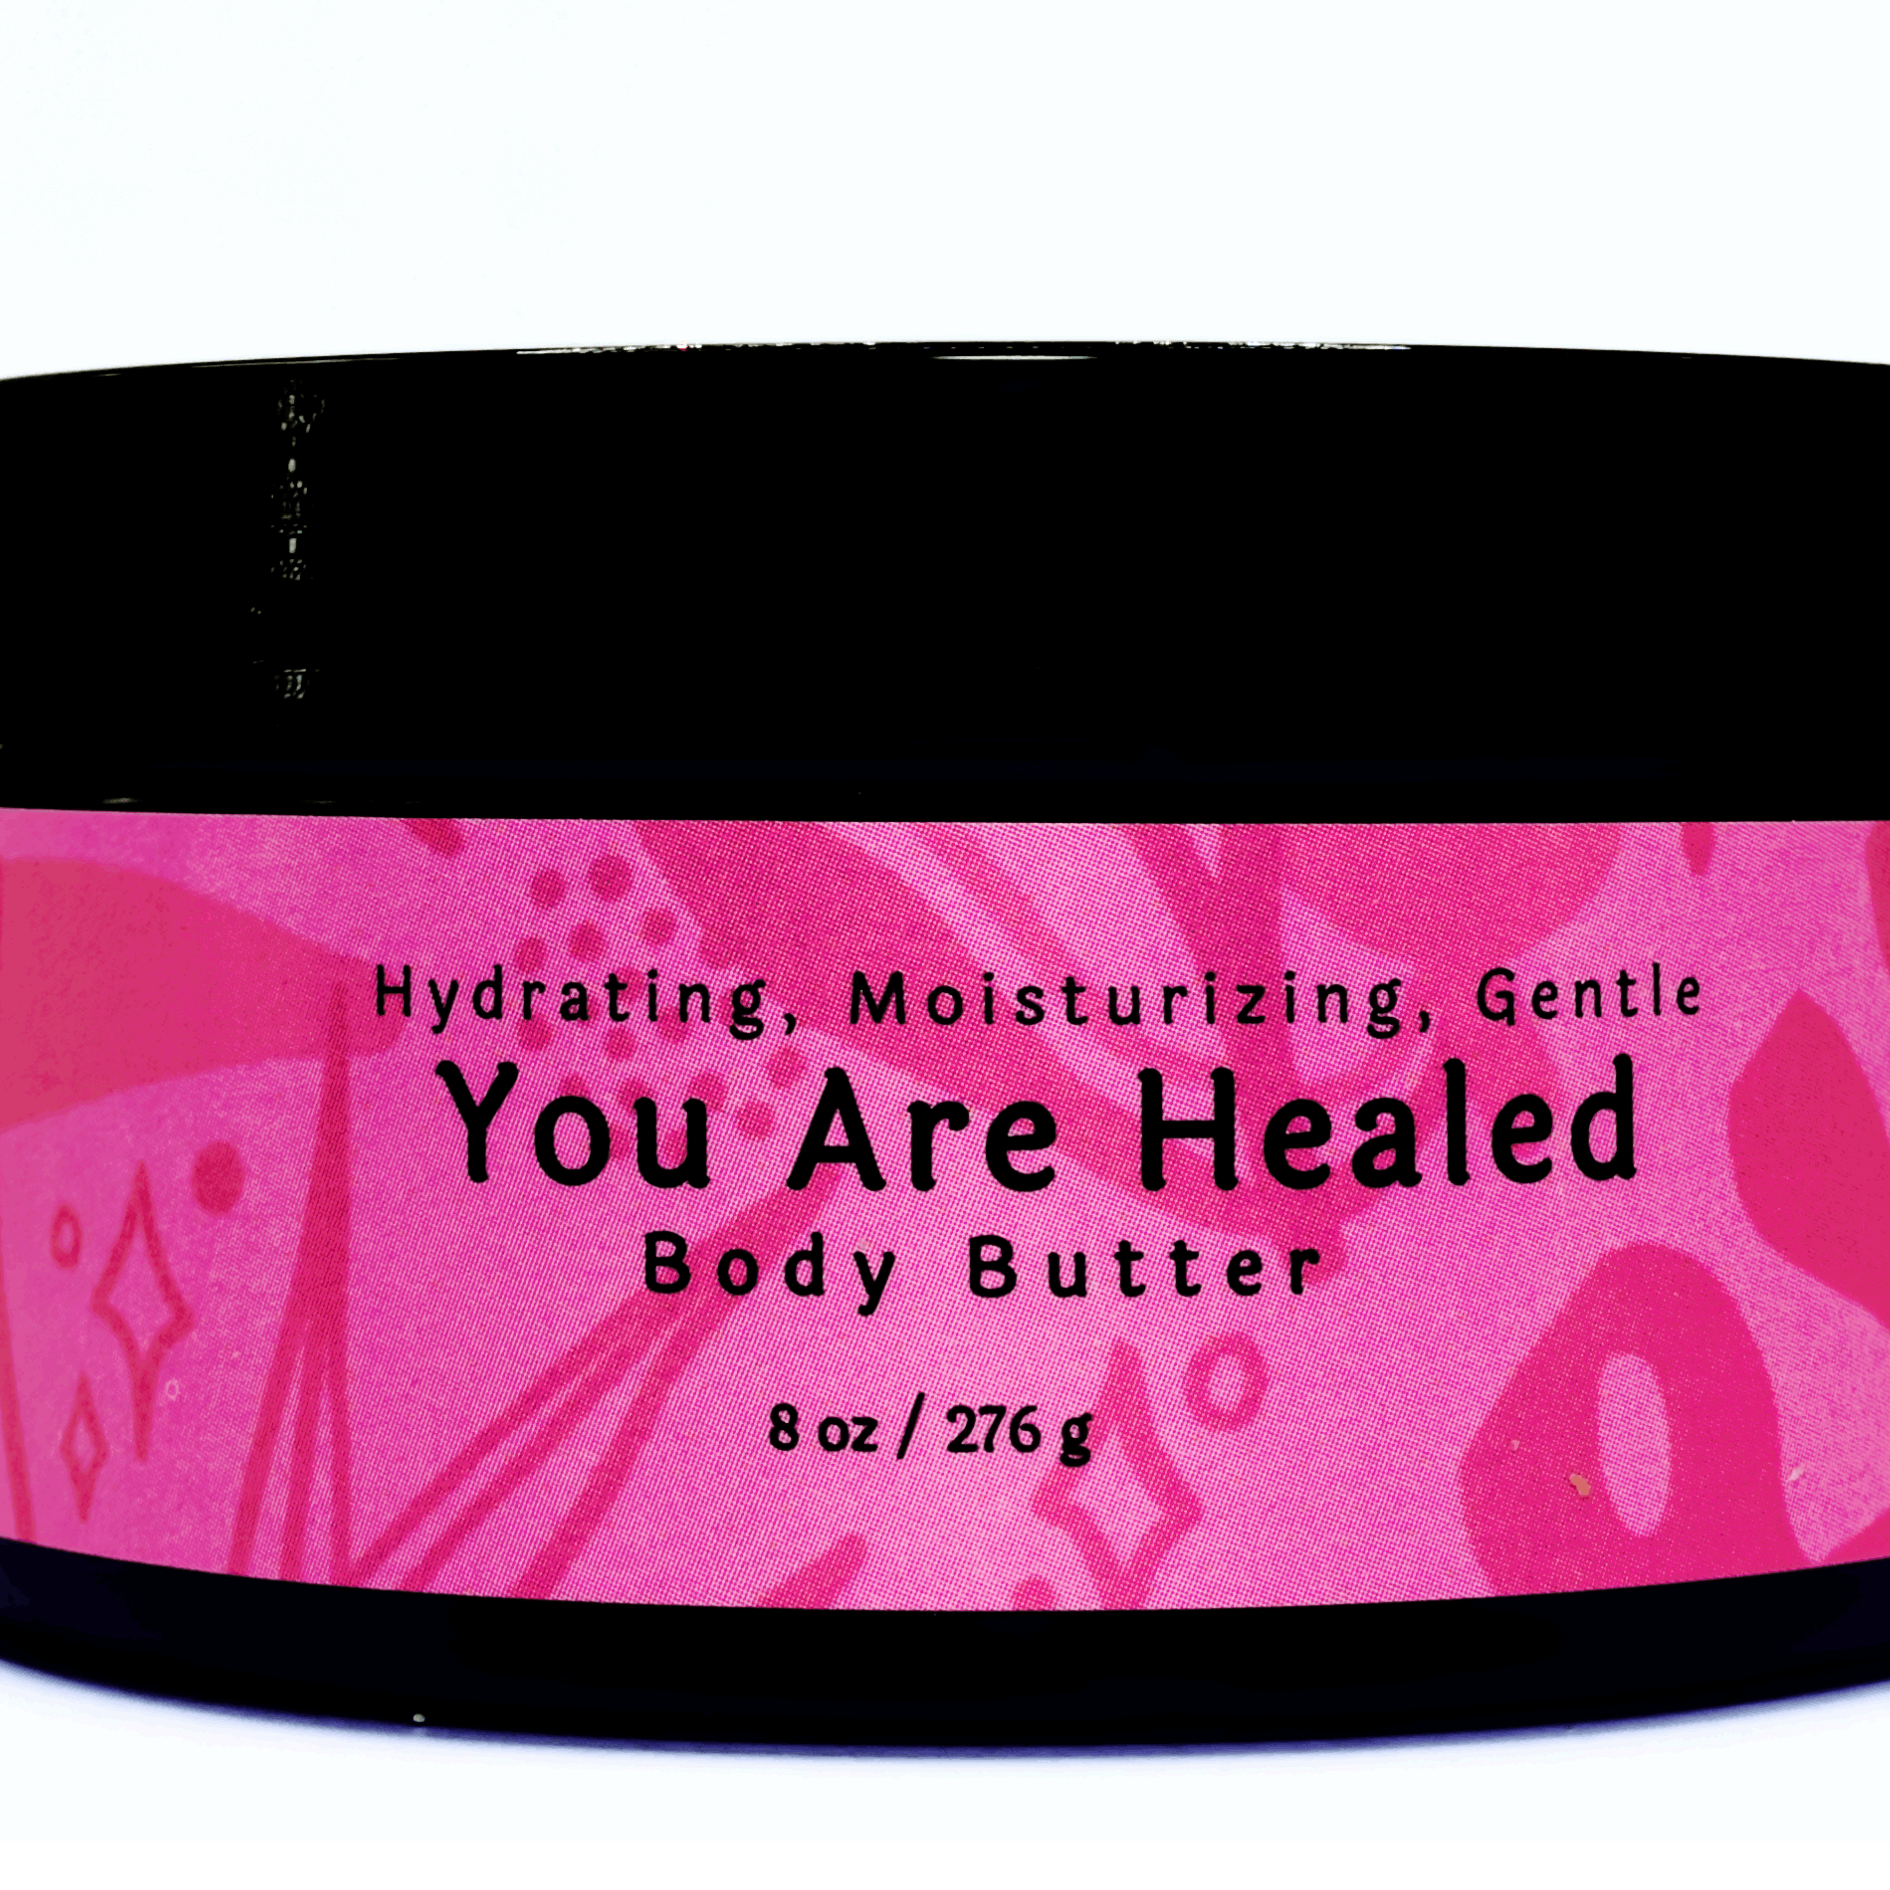 Jar of You Are Healed Body Butter showing its rich, creamy texture and elegant packaging.